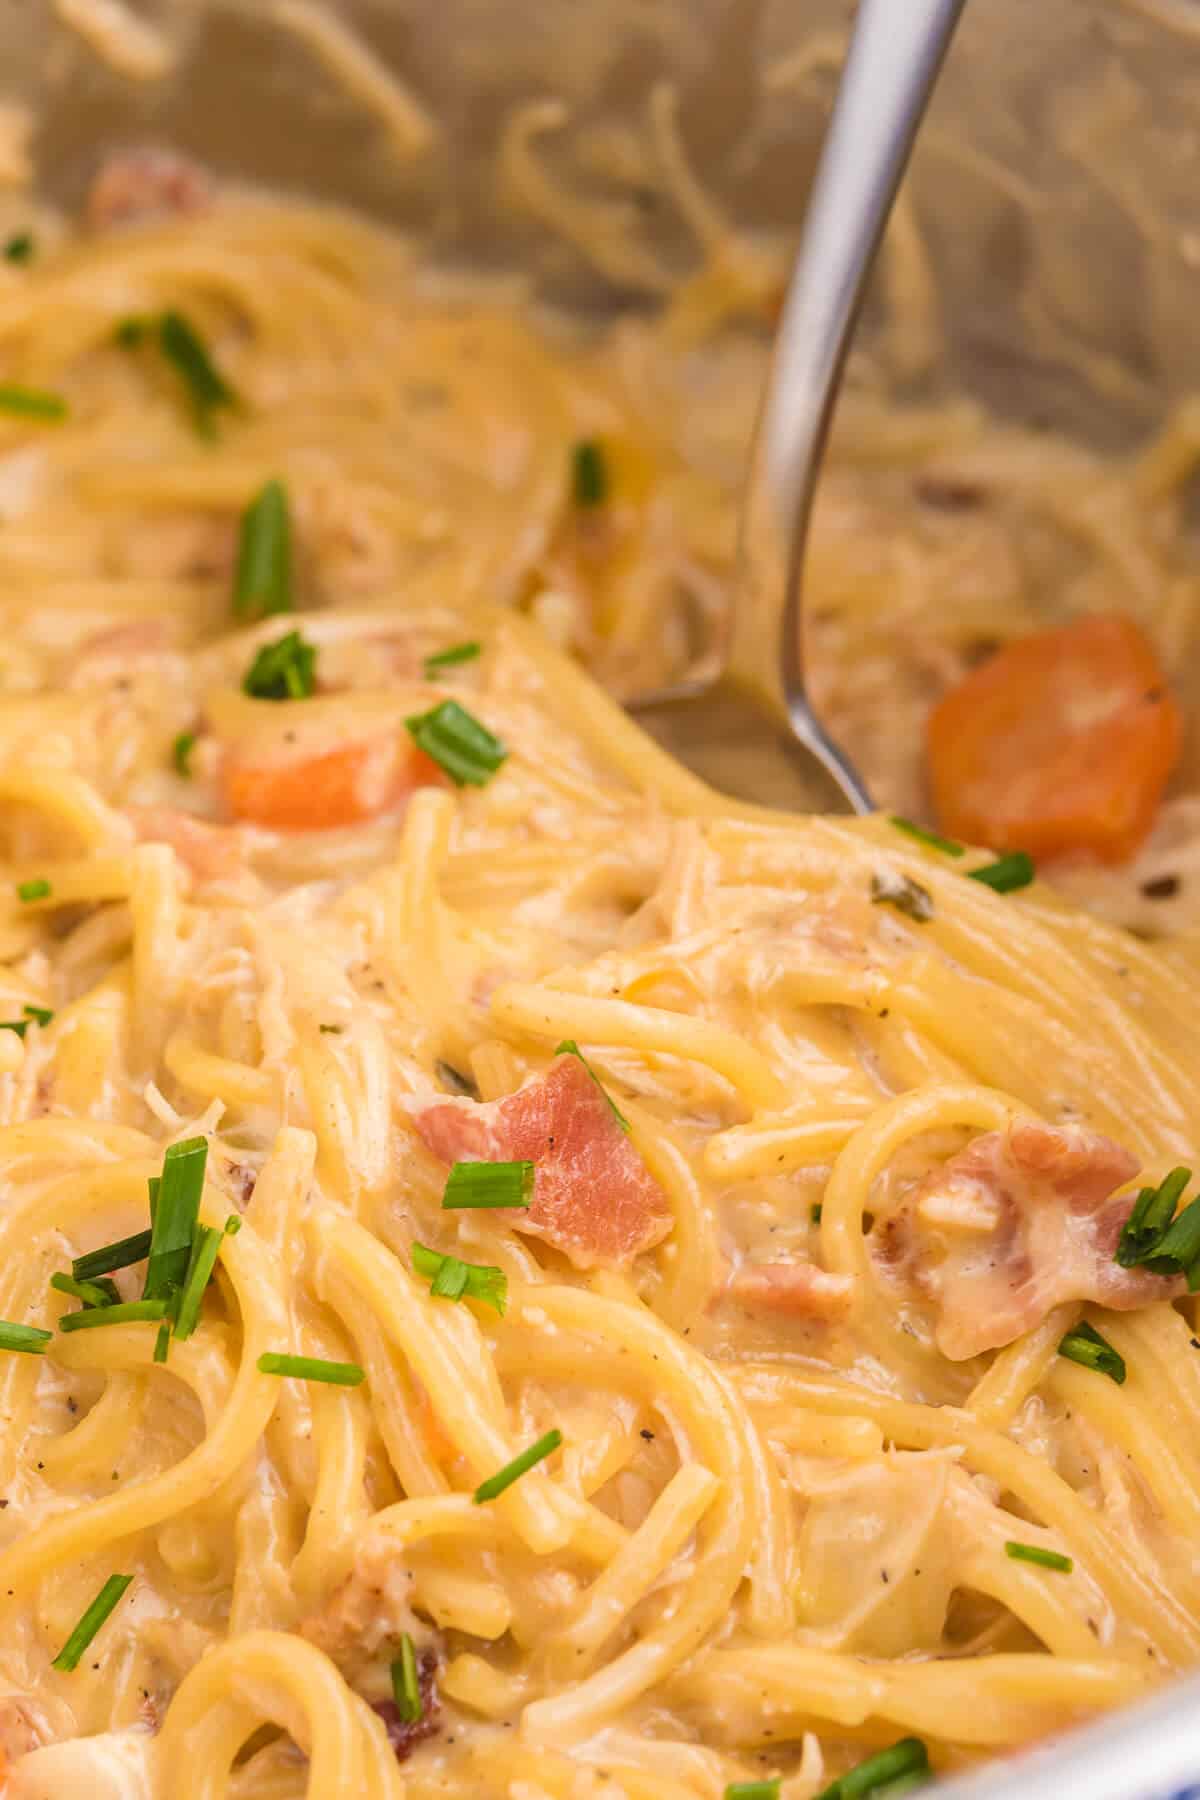 Crack Chicken Spaghetti Recipe - One bite and you'll be hooked! This easy and delicious dinner recipe is creamy, cheesy and addictive. It's loaded with chicken, bacon, veggies and spaghetti noodles in a flavorful cream cheese based sauce.